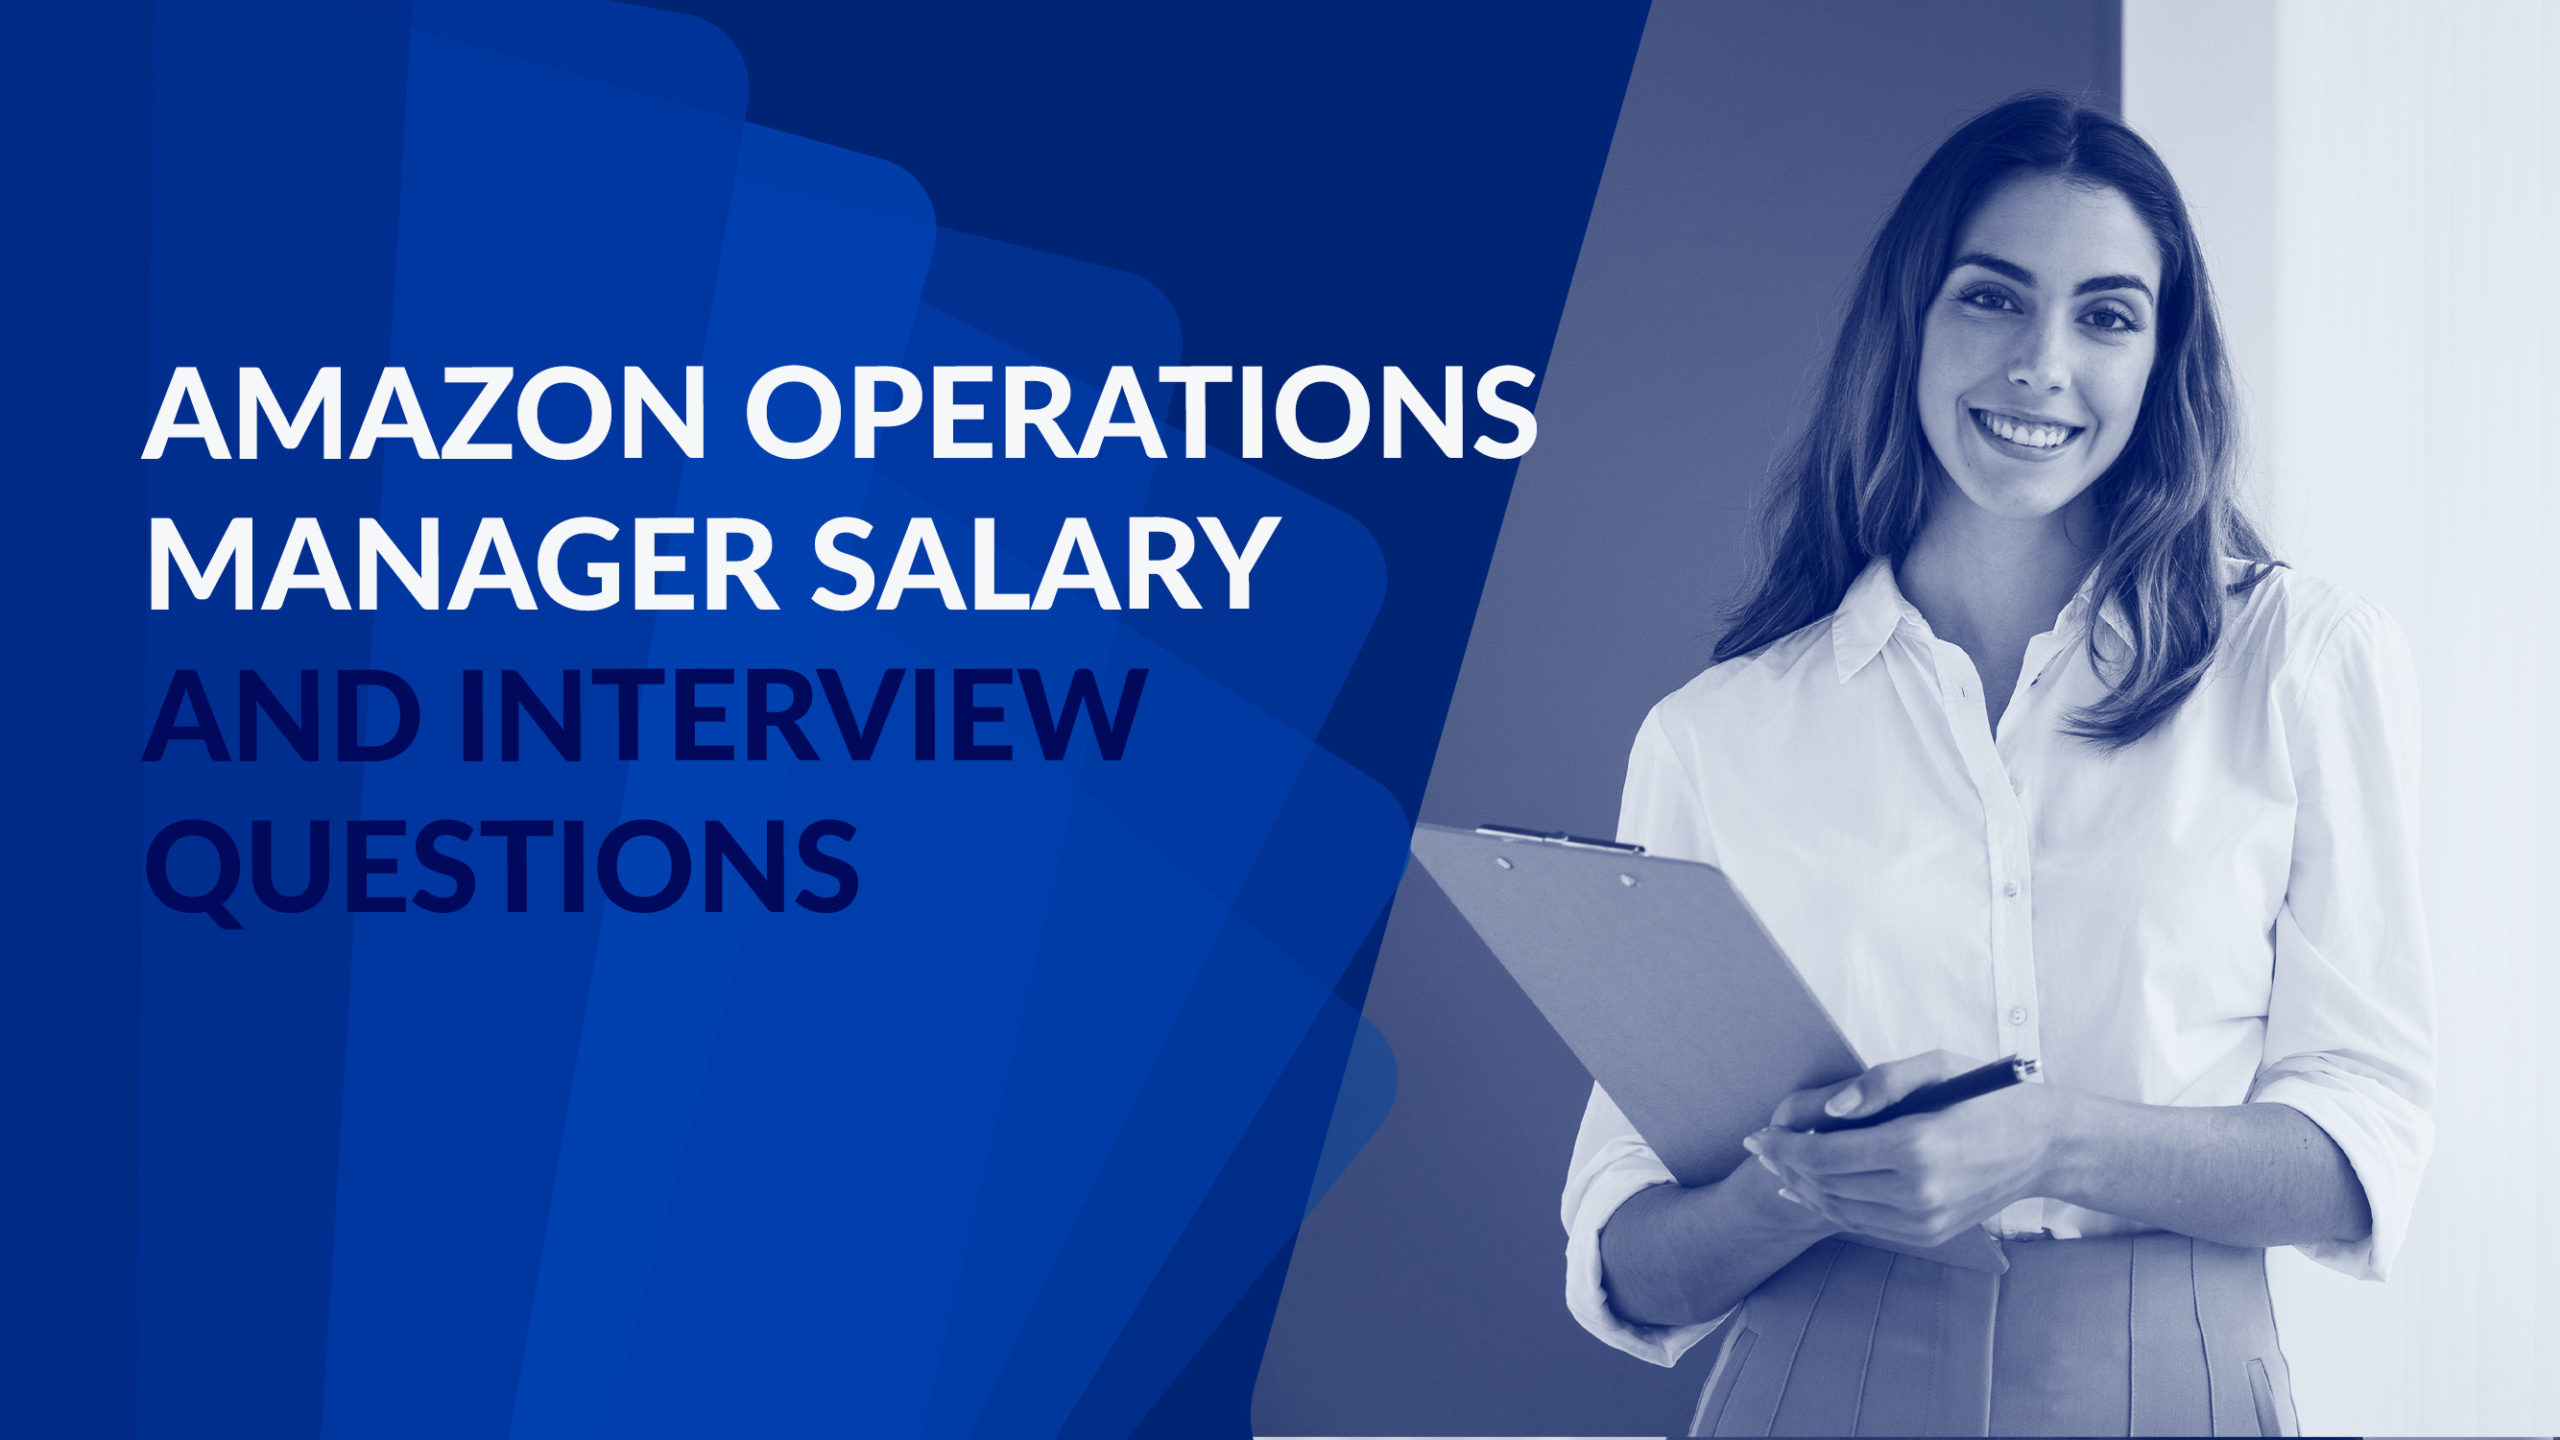 Amazon Operations Manager Salary and Interview Questions